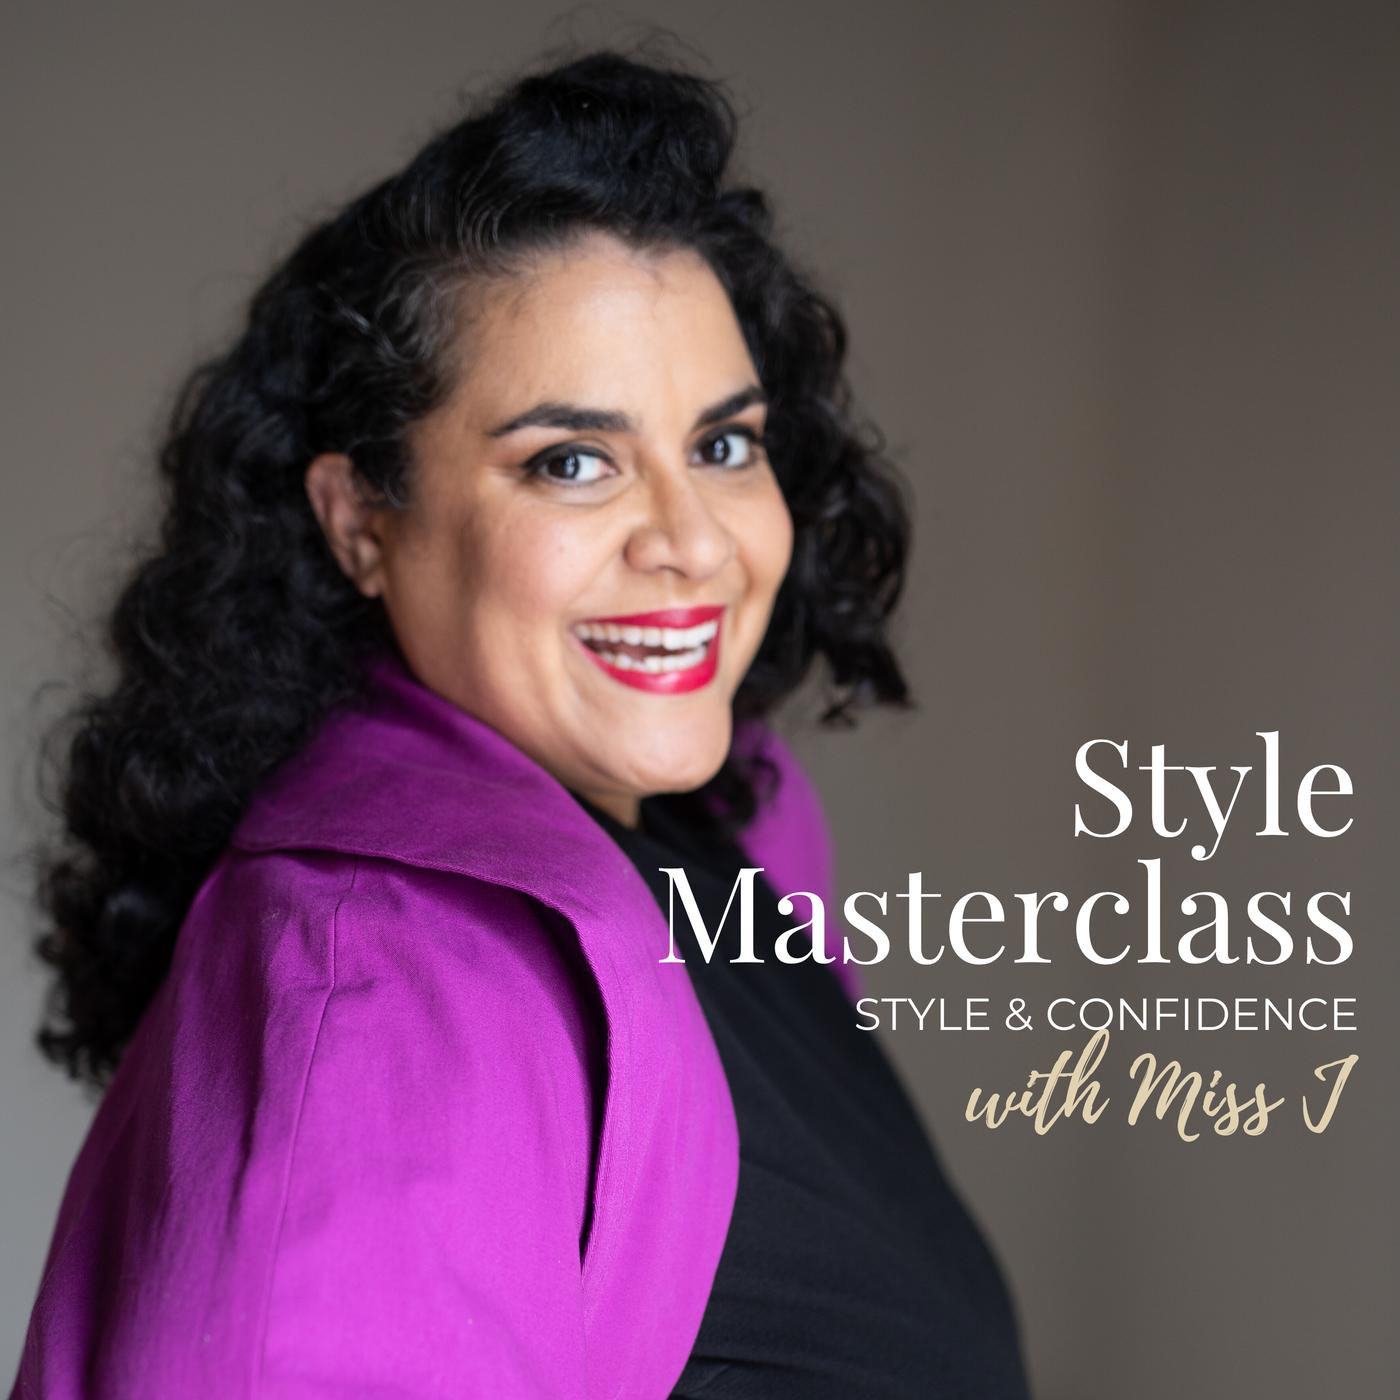 Style masterclass style & conference with miss j.